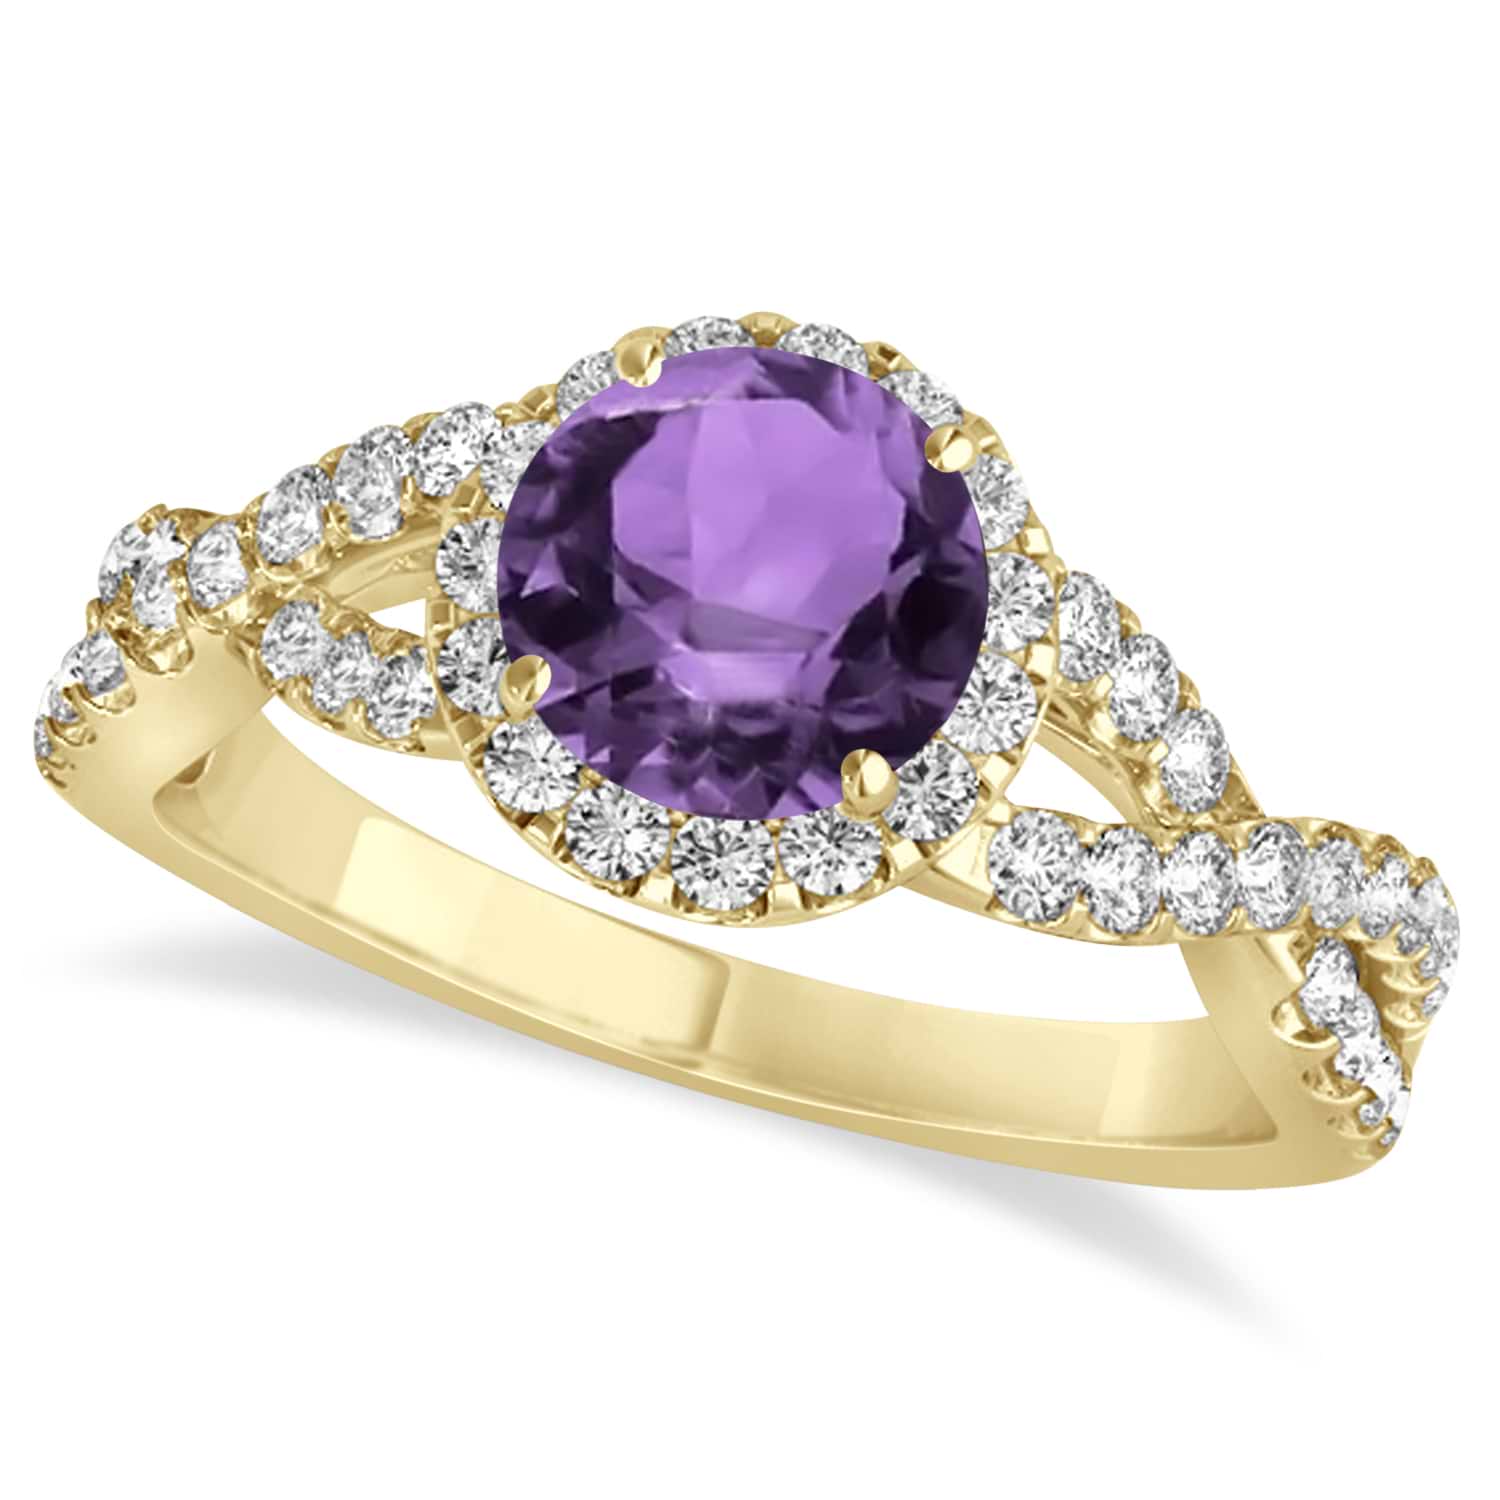 Amethyst & Diamond Twisted Engagement Ring 14k Yellow Gold 1.20ct